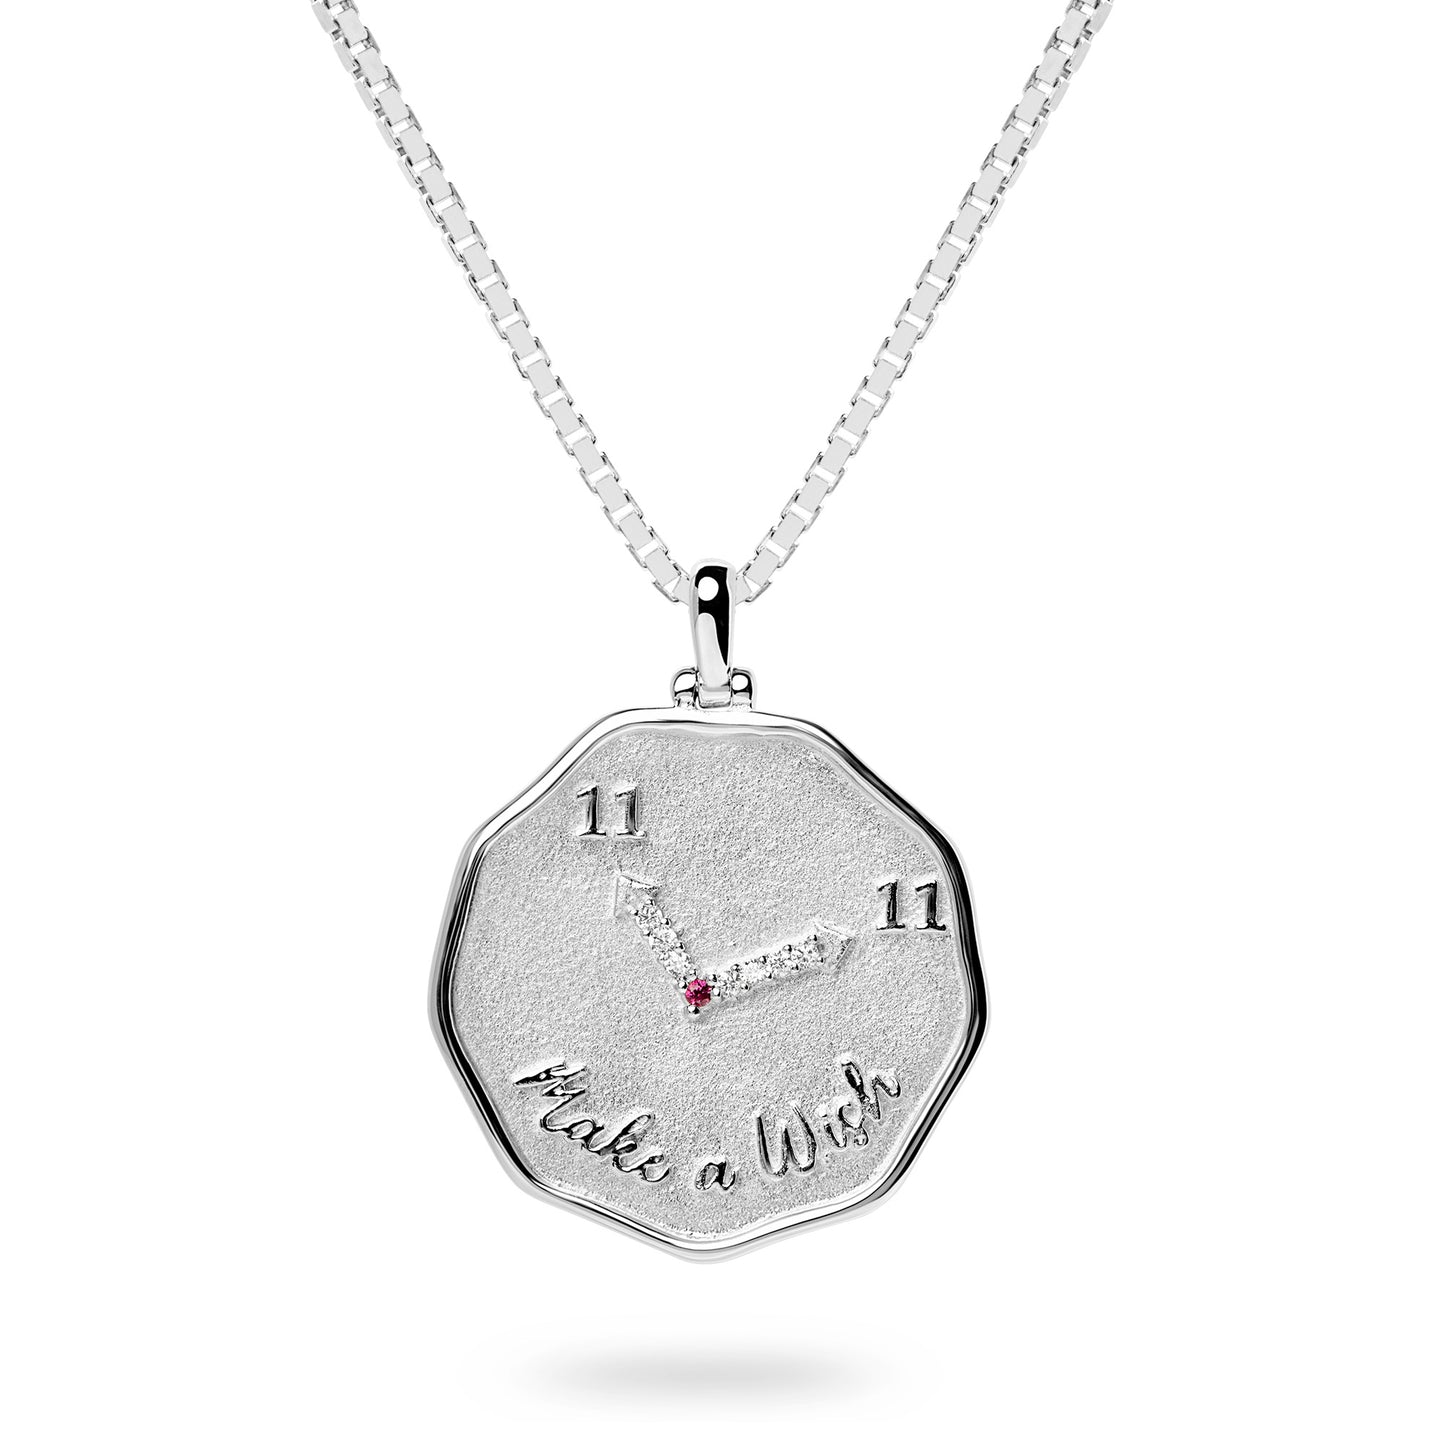 Diamond and Ruby “Make a wish at 11:11” Pendant Necklace